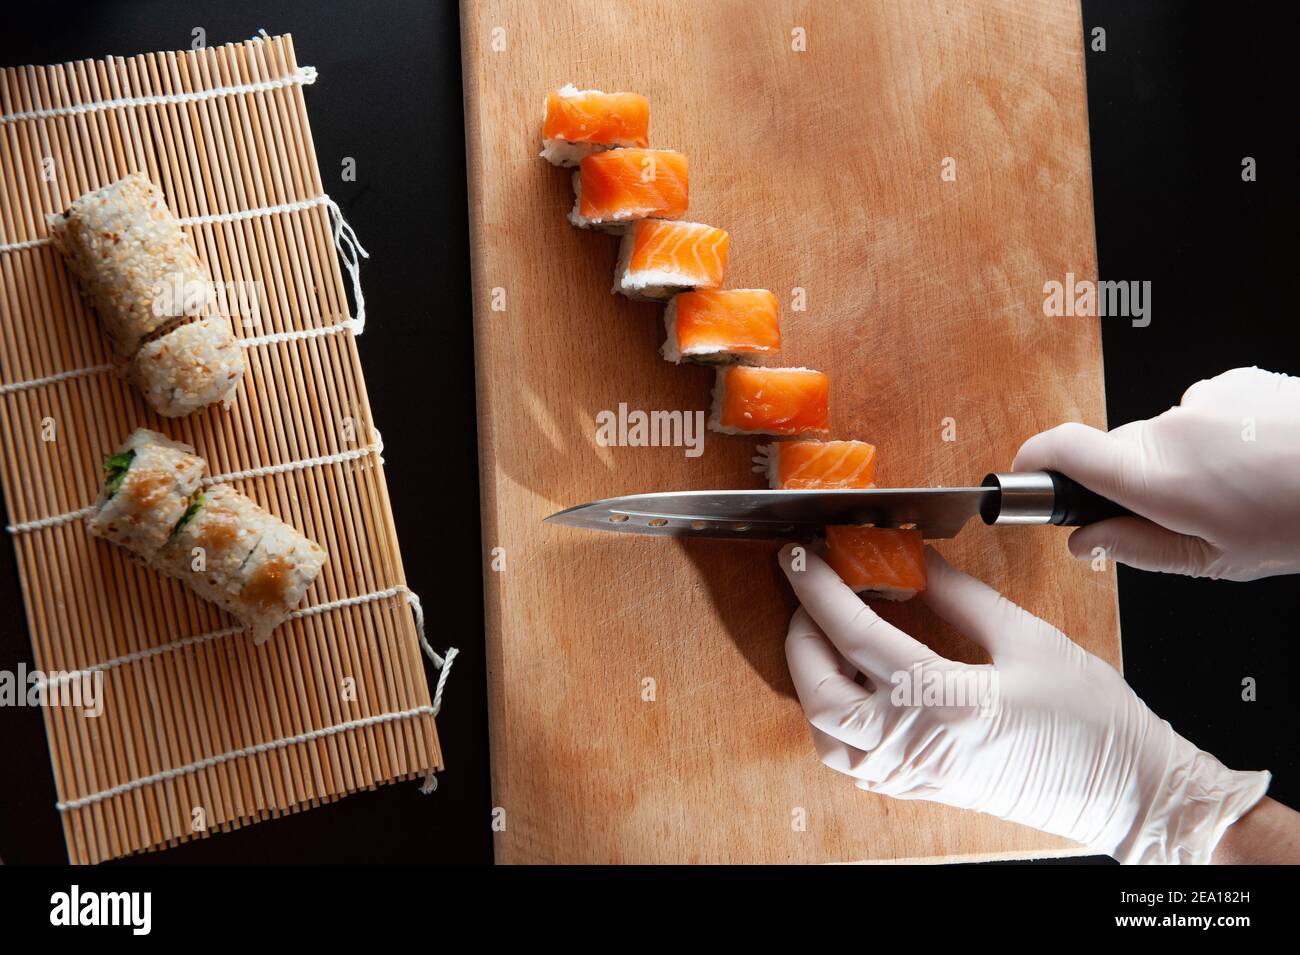 https://c8.alamy.com/comp/2EA182H/knife-in-hand-cuts-the-roll-closeup-on-a-wooden-board-2EA182H.jpg